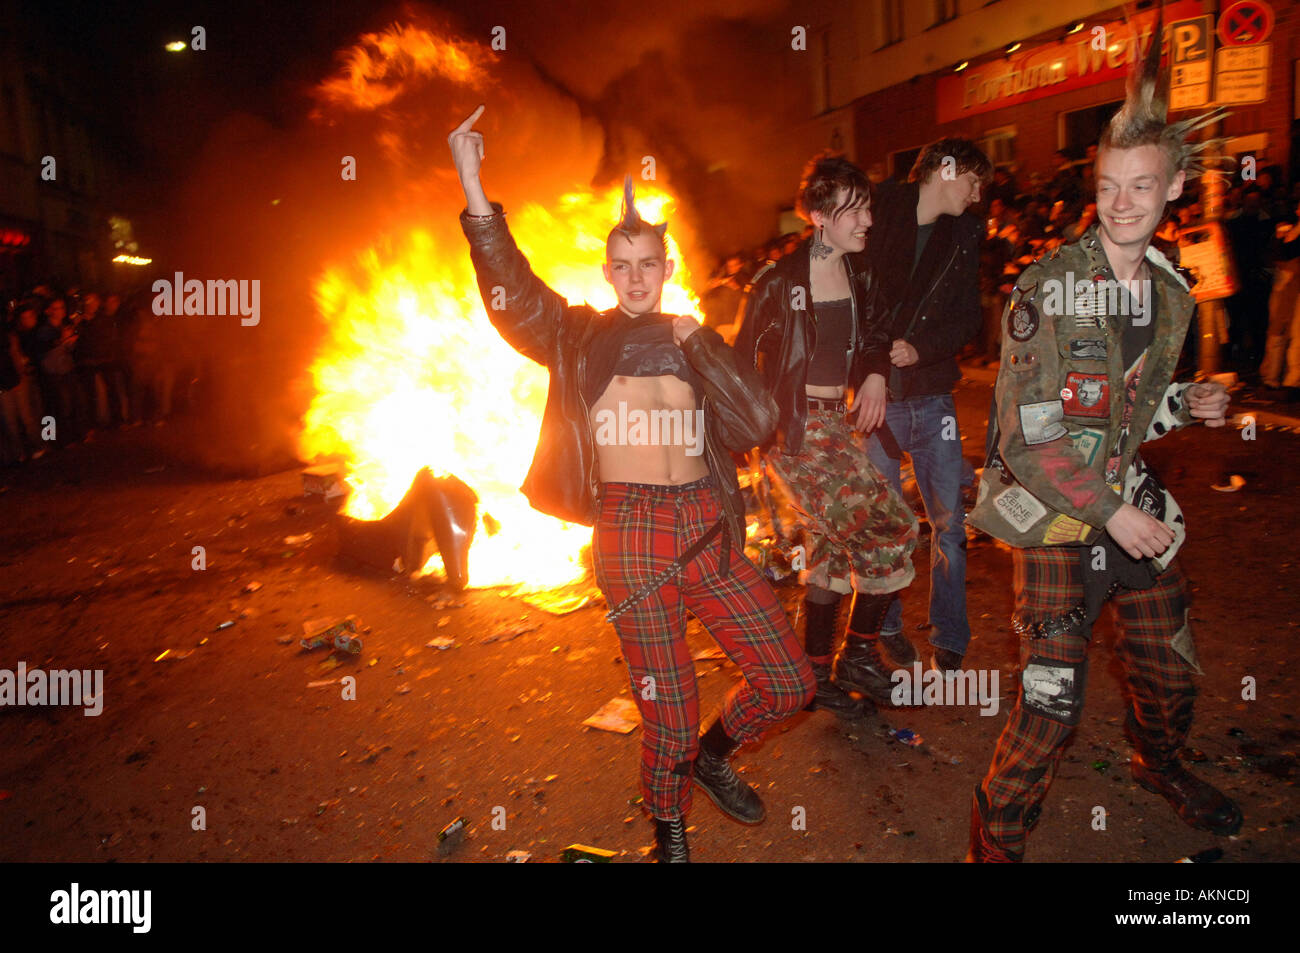 Punks taking part in riots on May 1, Berlin, Germany Stock Photo